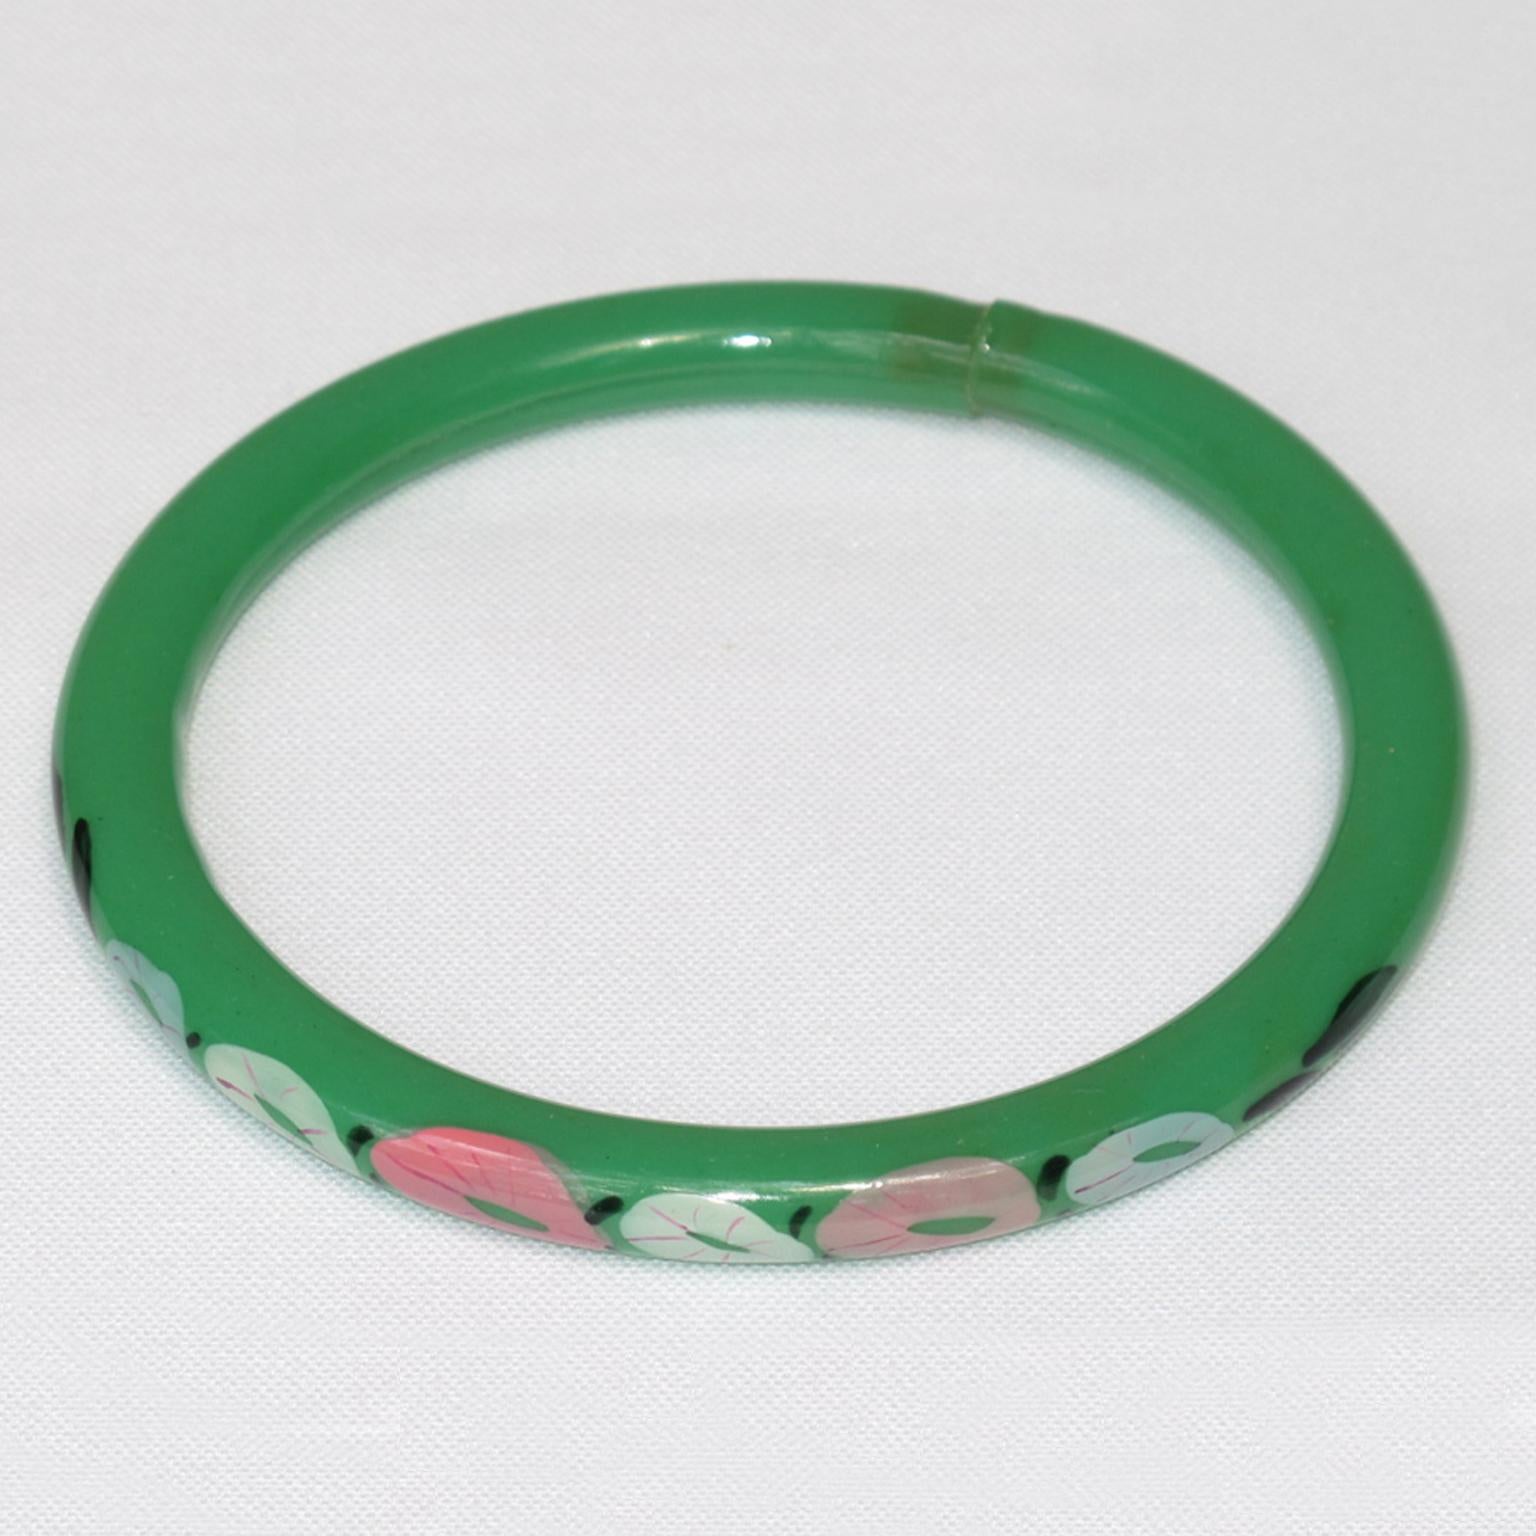 This is a lovely 1920s French Art Deco celluloid bracelet bangle. The piece features a light hollow tube shape with a floral design on one side of the bracelet. 
The hollow bracelet technique is an ancient technique applied to jewelry at the turn of